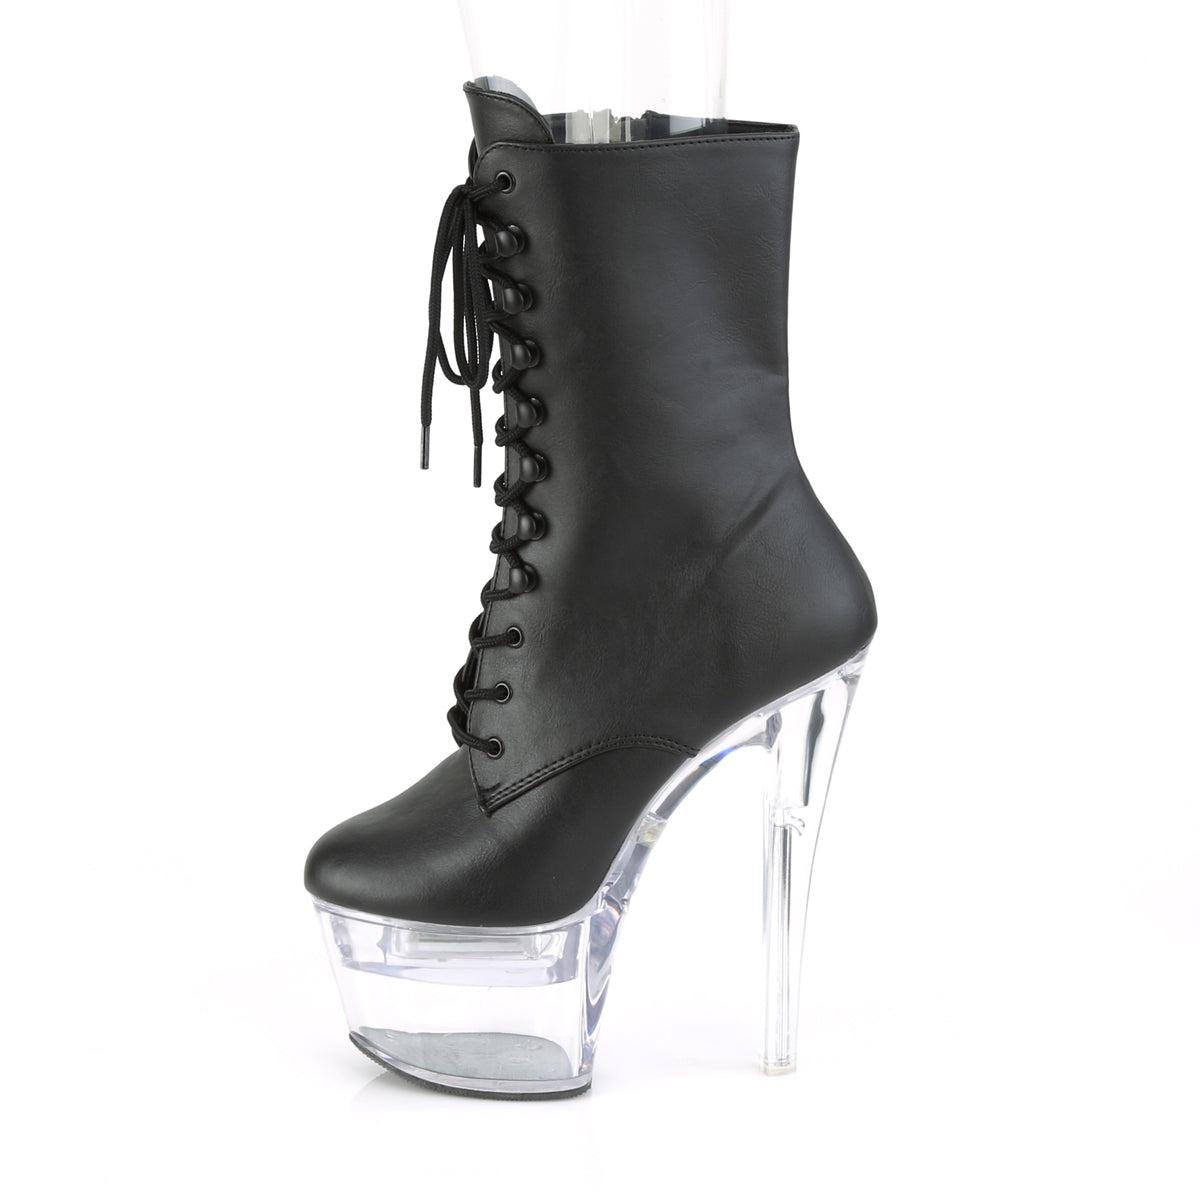 Pleaser Womens Ankle Boots FLASHDANCE-1020-7 Blk Faux Leather/Clr